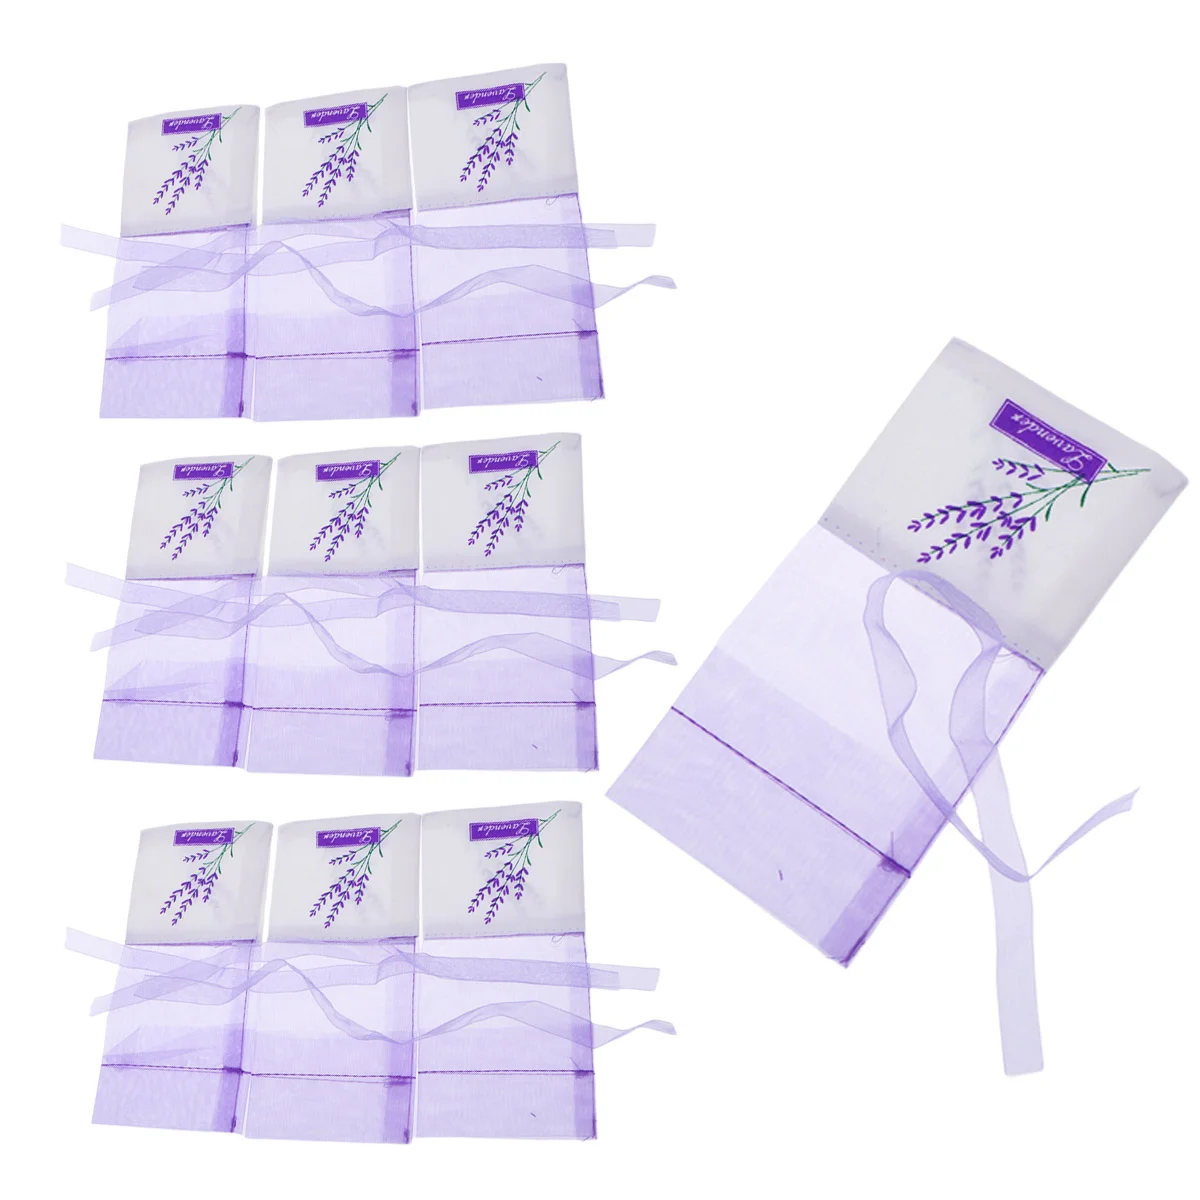 

Lavender Sachet Empty Sachets Organza Fragrance Drawstring Scented Pouch Dried Gift Pouches Gauze Wedding Cotton Drawers Sack